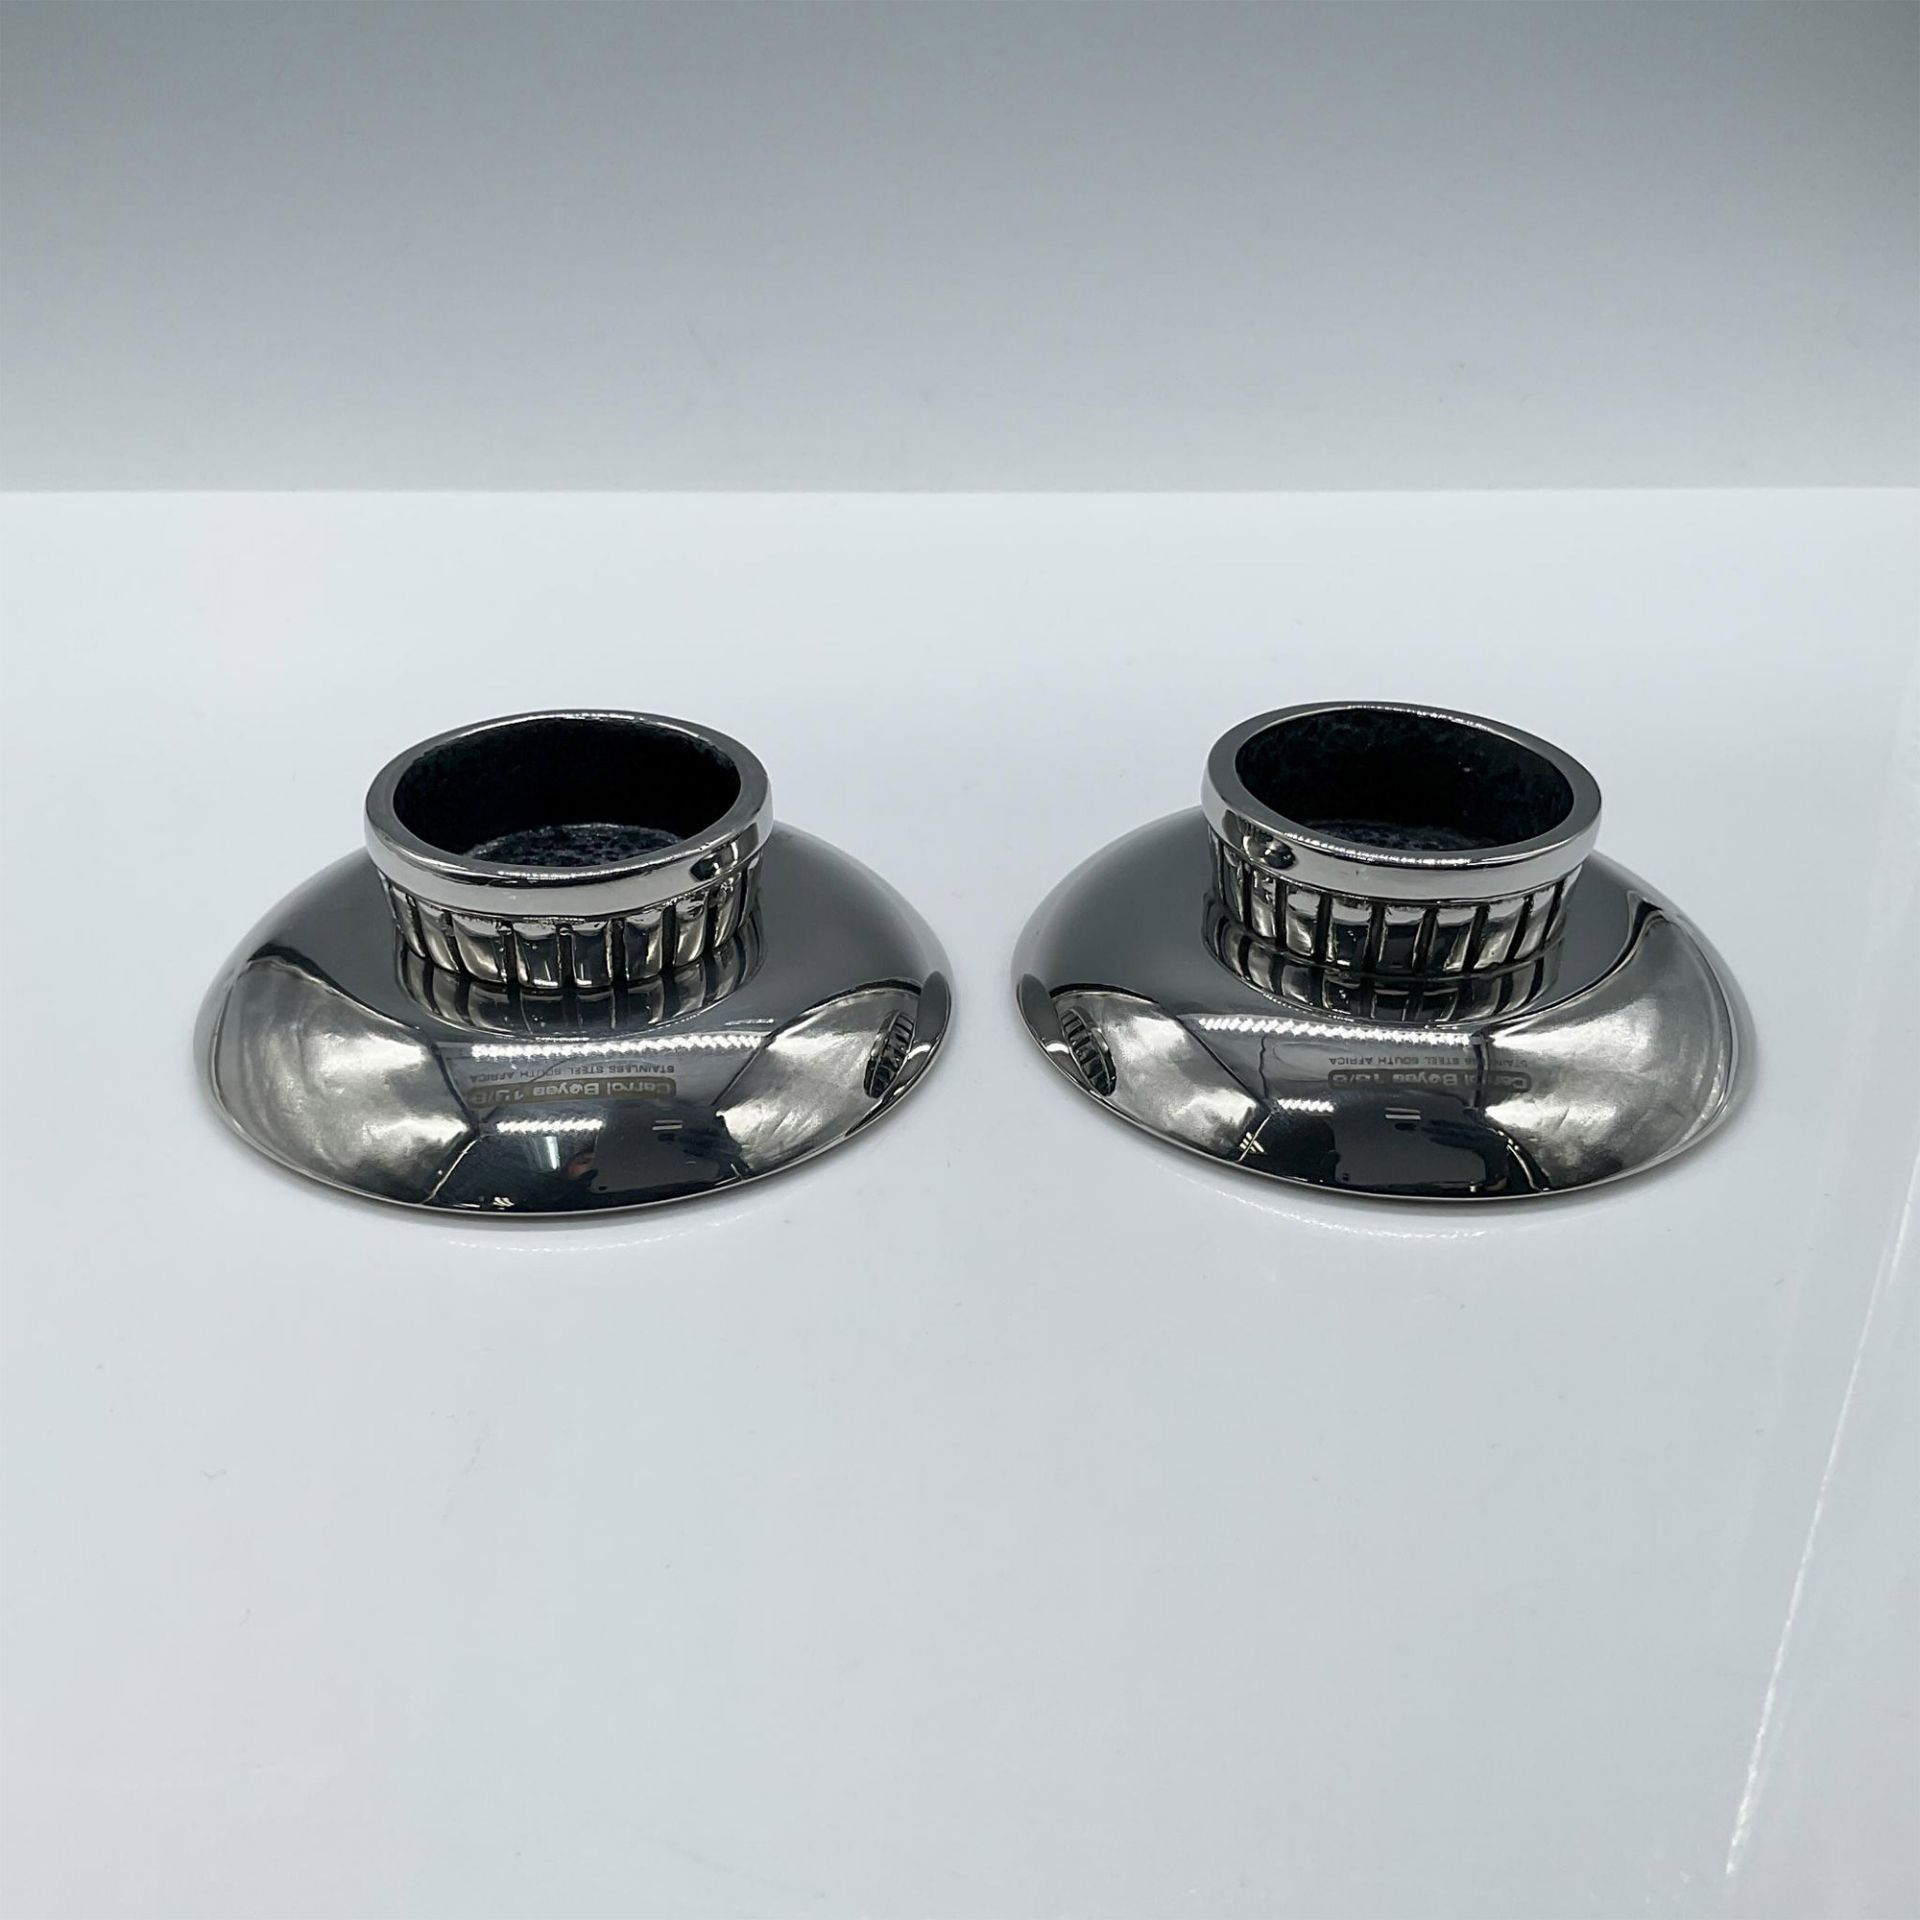 Pair of Carrol Boyes Stainless Steel Wasabi Bowls 18/8 - Image 3 of 5